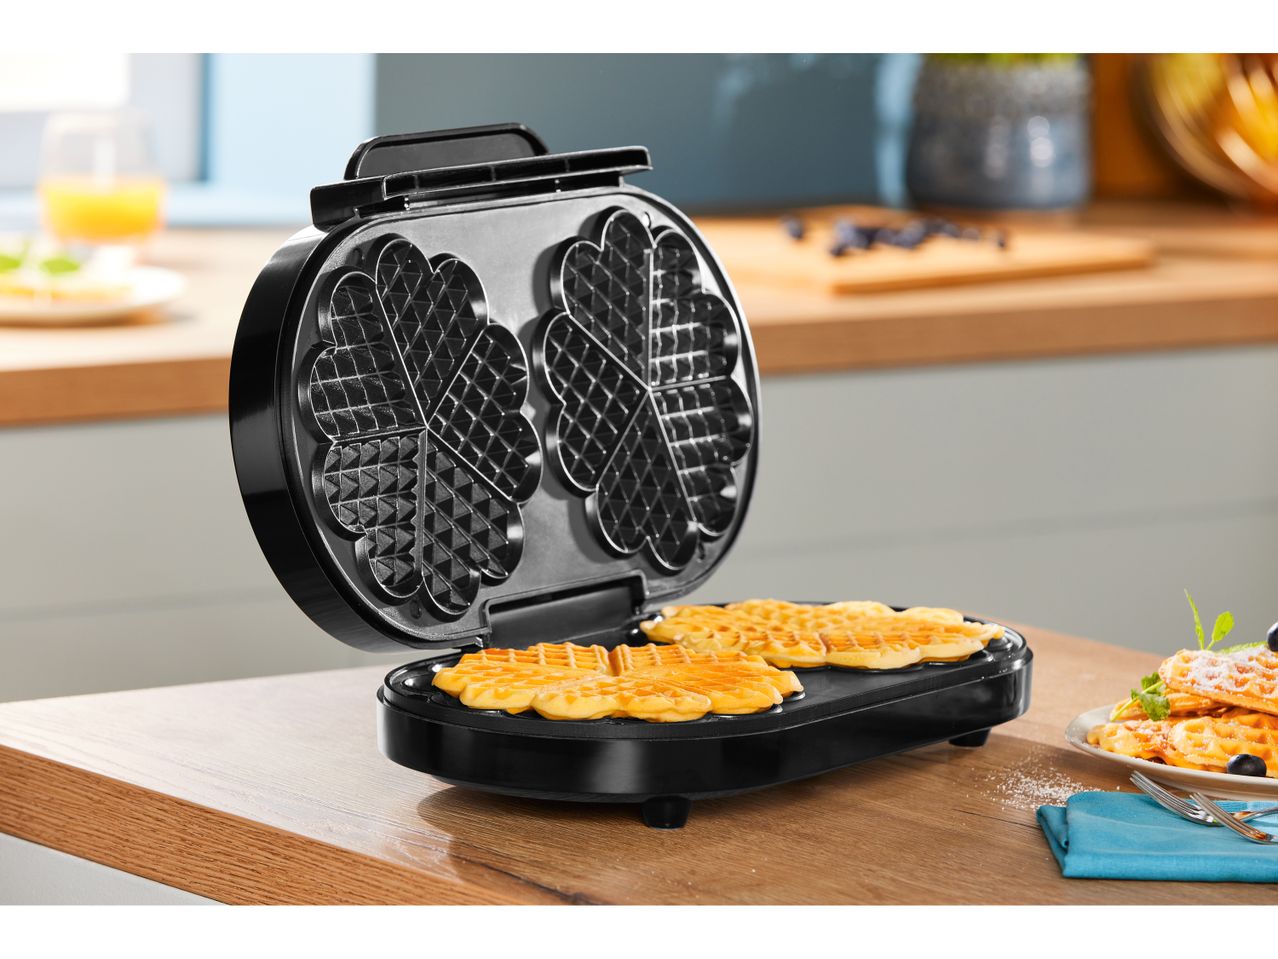 Go to full screen view: Double Waffle Maker - Image 3